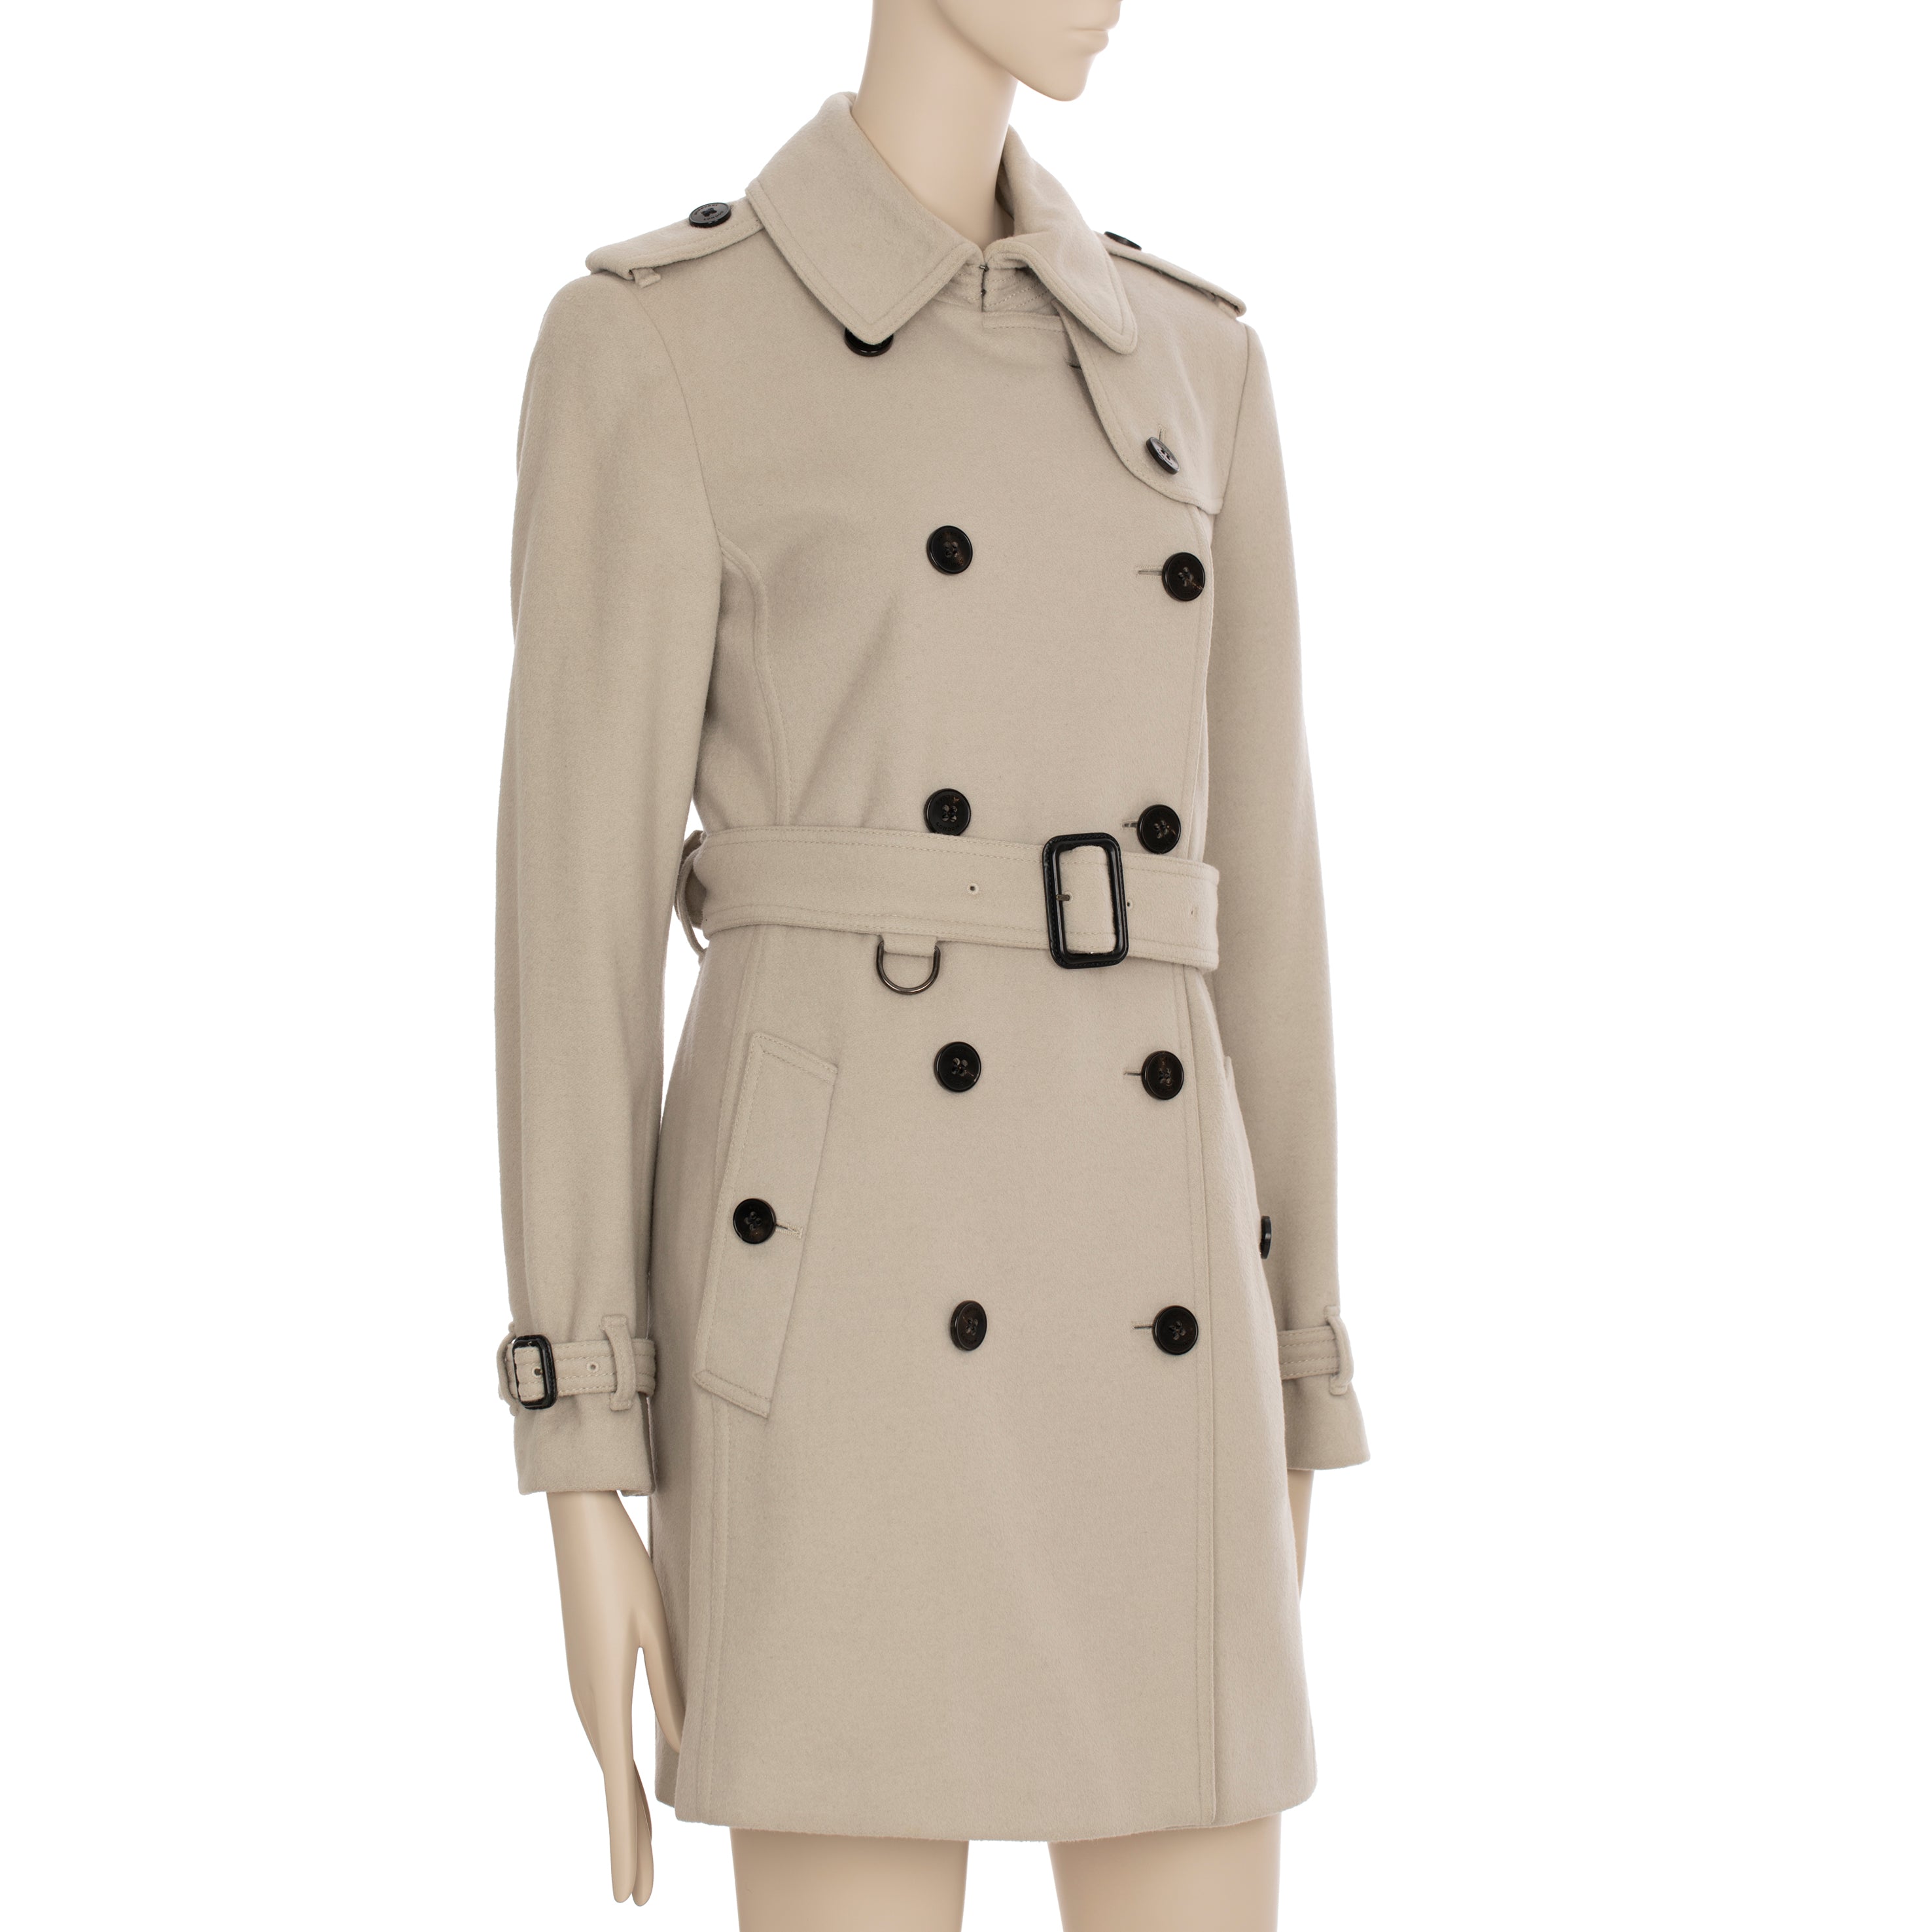 Burberry Beige Wool & Cashmere Trench Coat 38 IT